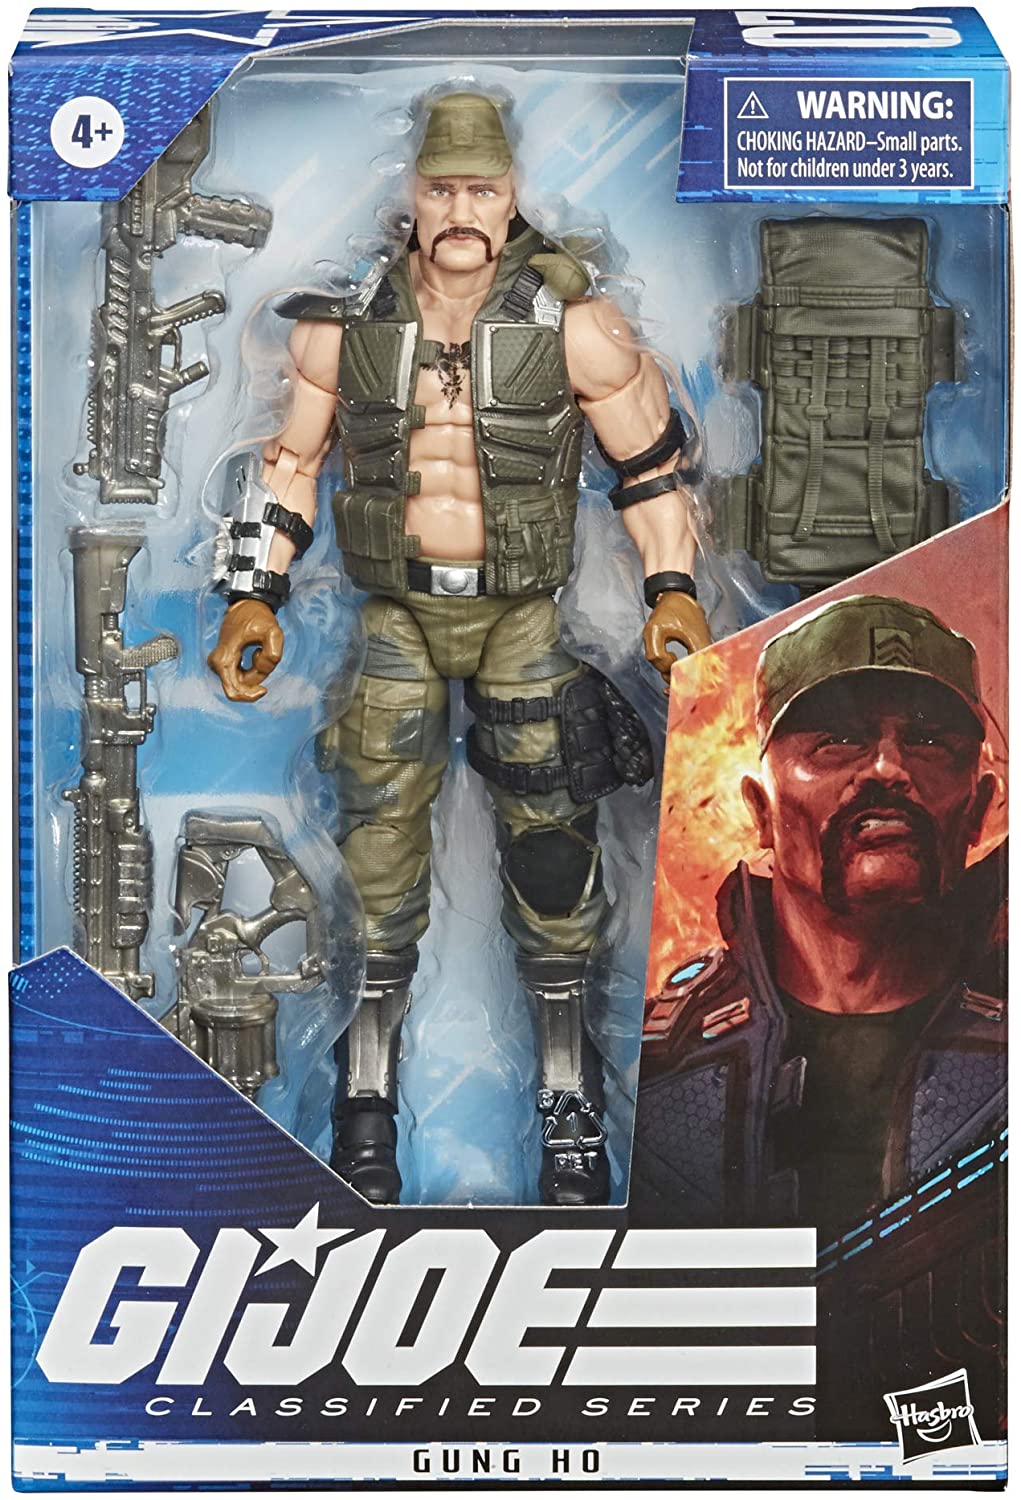 Hasbro G.I. Joe Classified Series Gung Ho Action Figure 07 Collectible Premium Toy with Multiple Accessories 6-Inch Scale with Custom Package Art